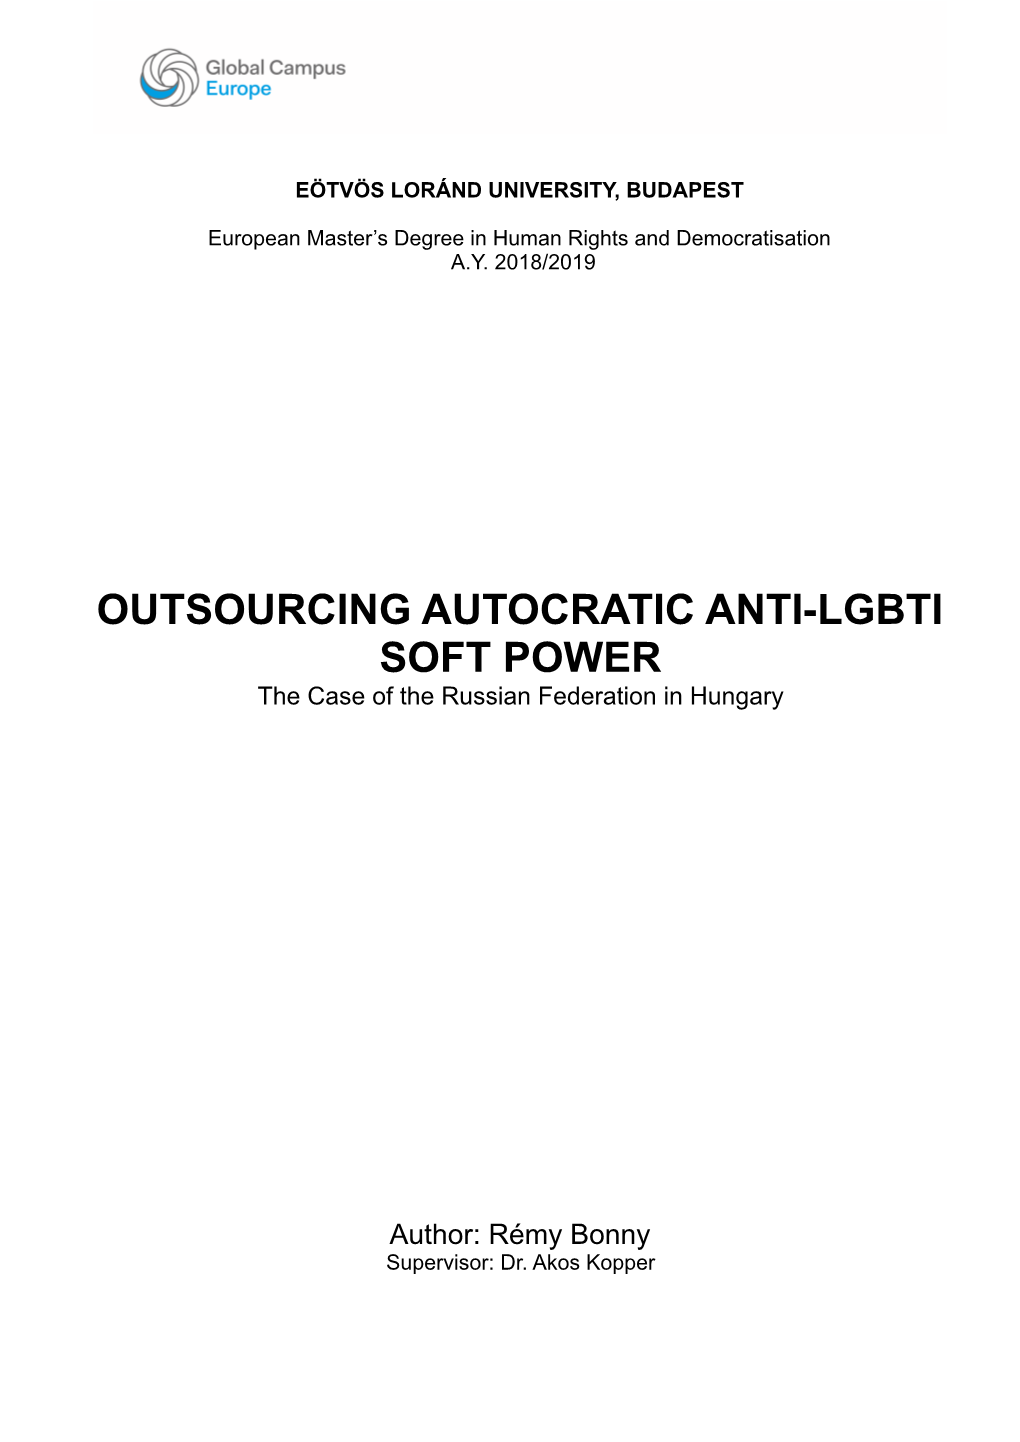 OUTSOURCING AUTOCRATIC ANTI-LGBTI SOFT POWER the Case of the Russian Federation in Hungary